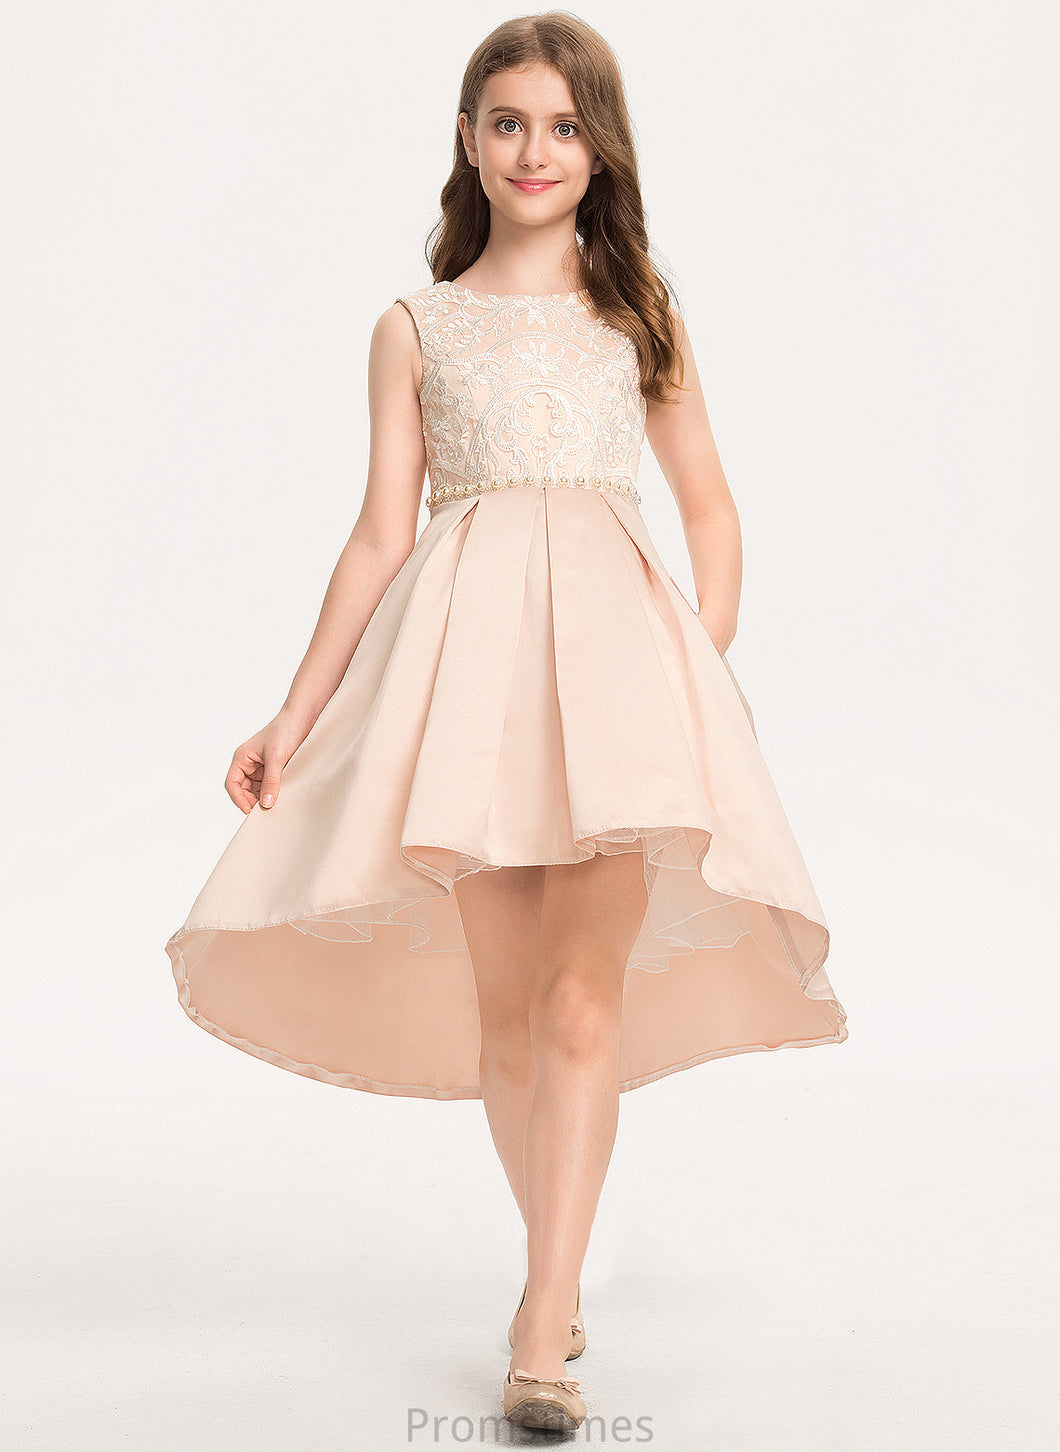 With Scoop Junior Bridesmaid Dresses Neck Asymmetrical A-Line Pockets Ansley Lace Satin Beading